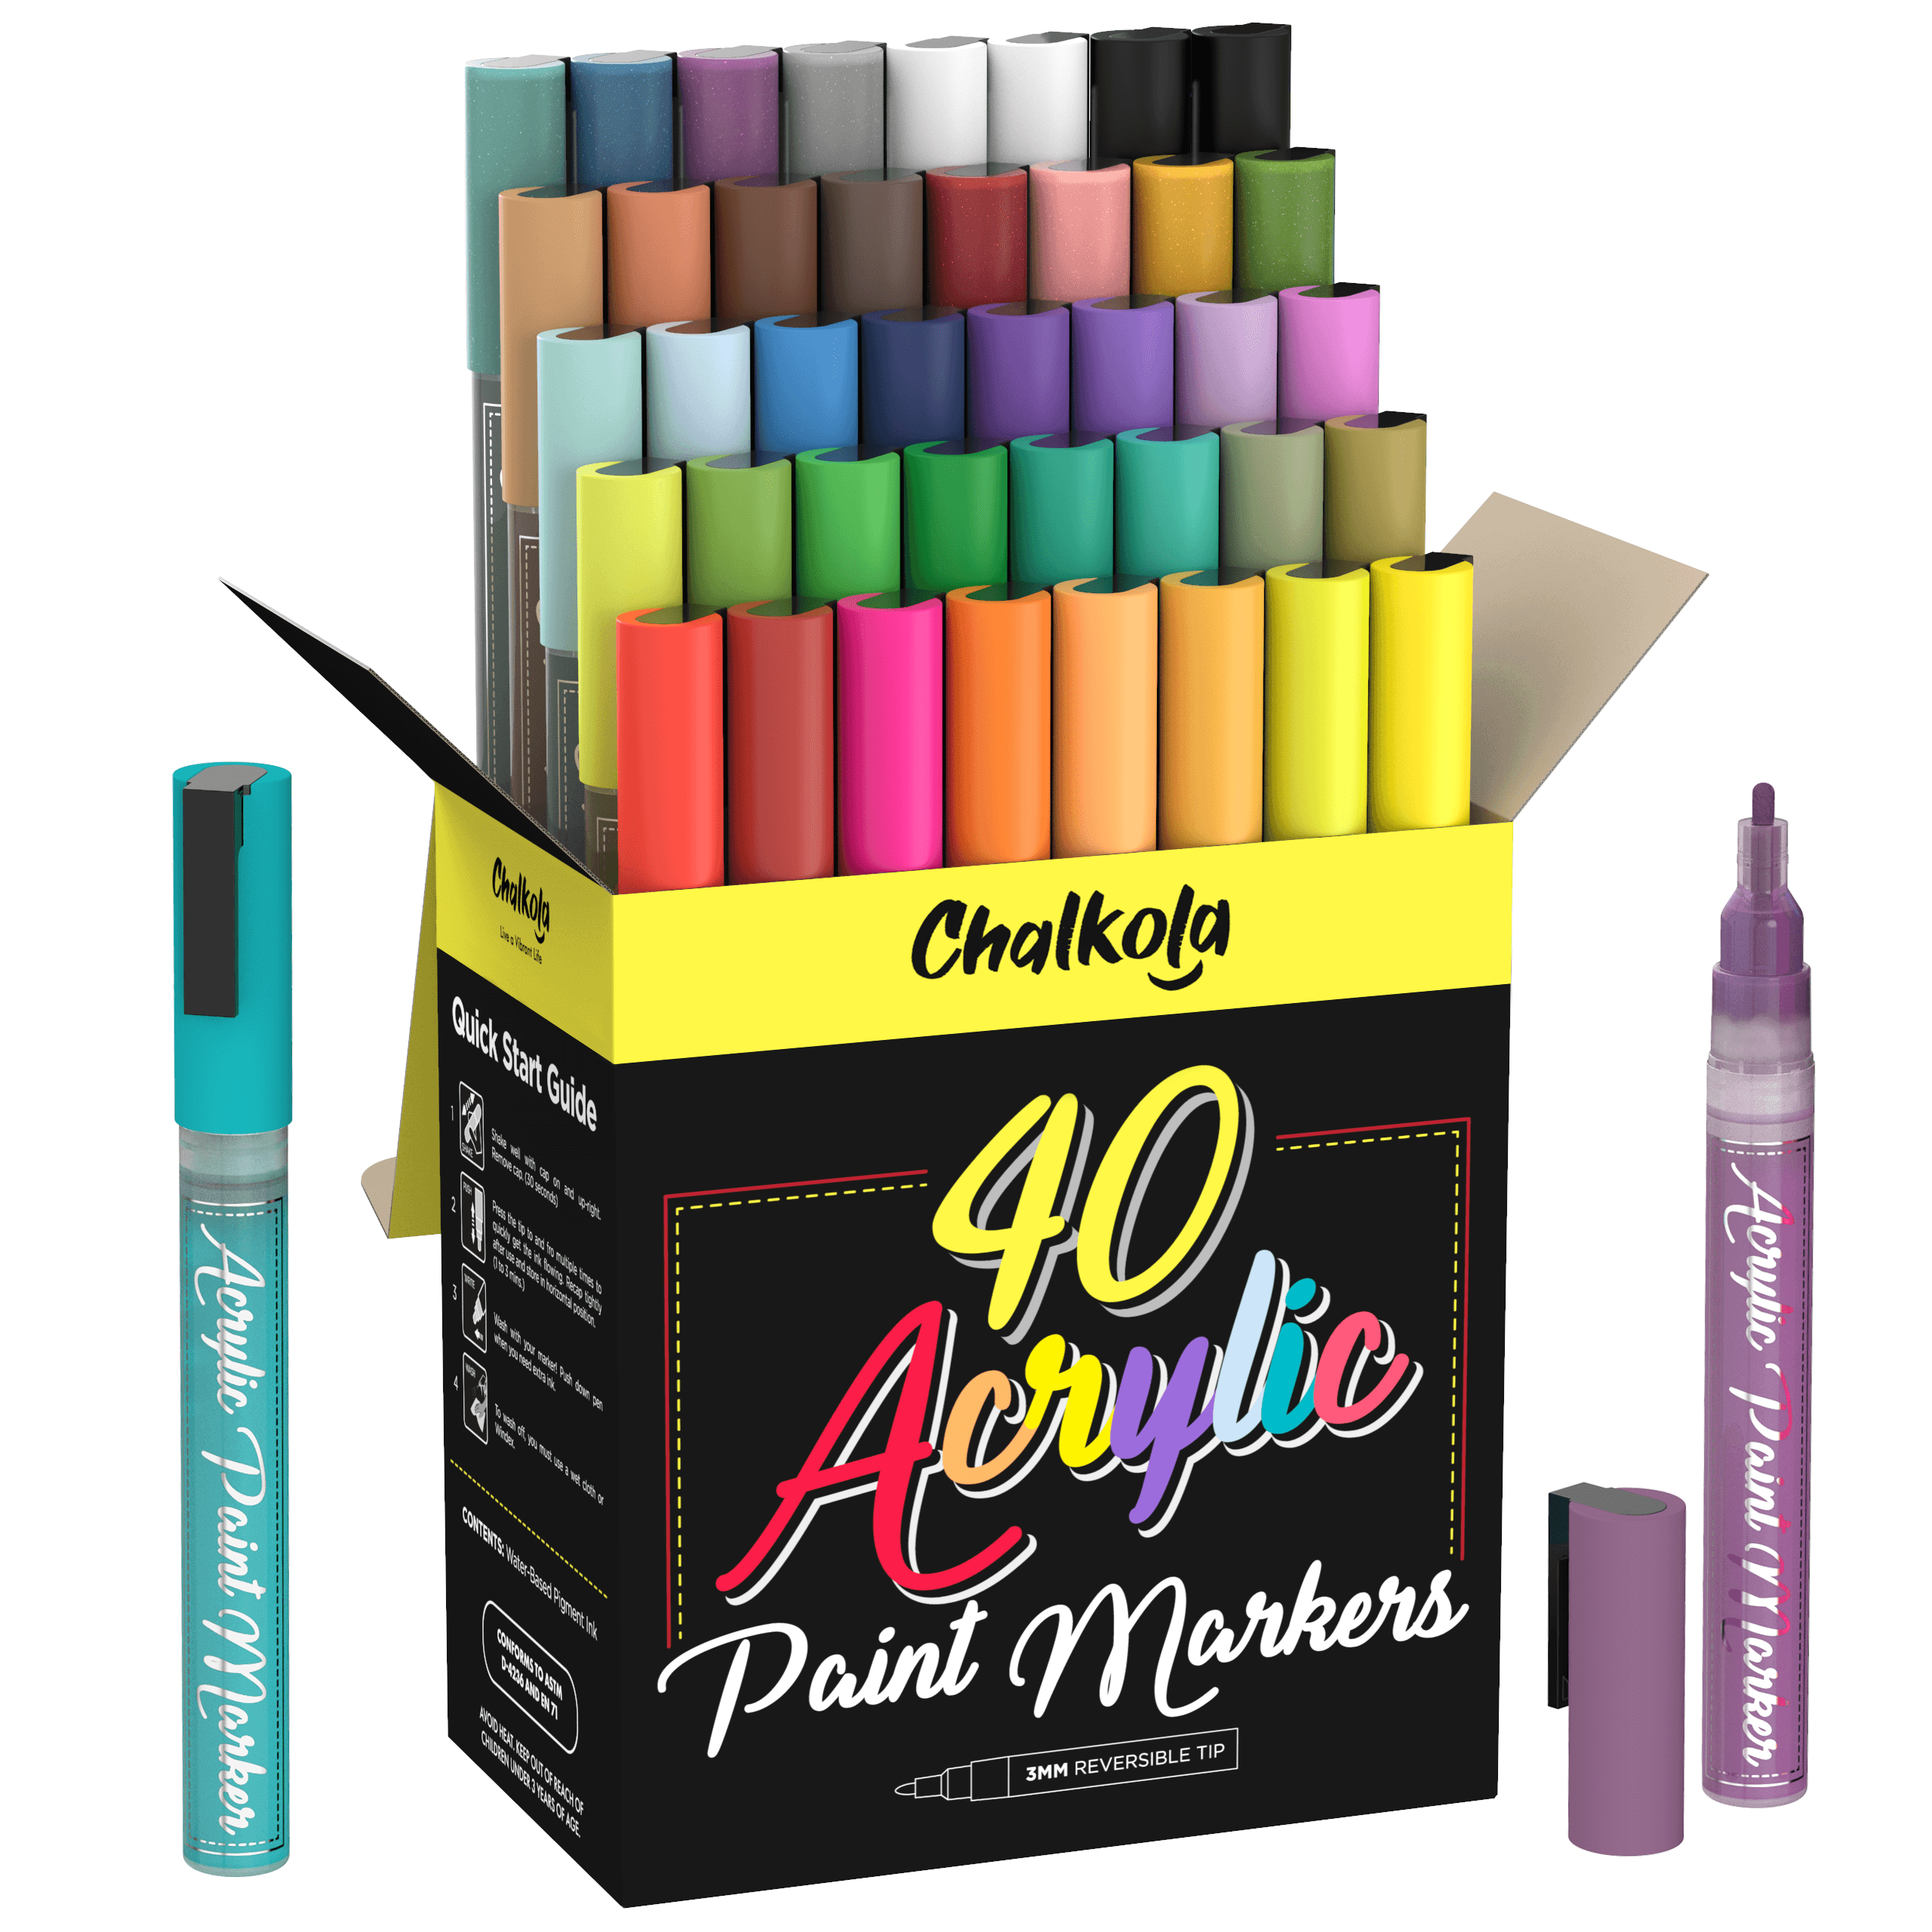 Paint Pens Paint Markers 24 Colors Three Tips Acrylic Markers Pens